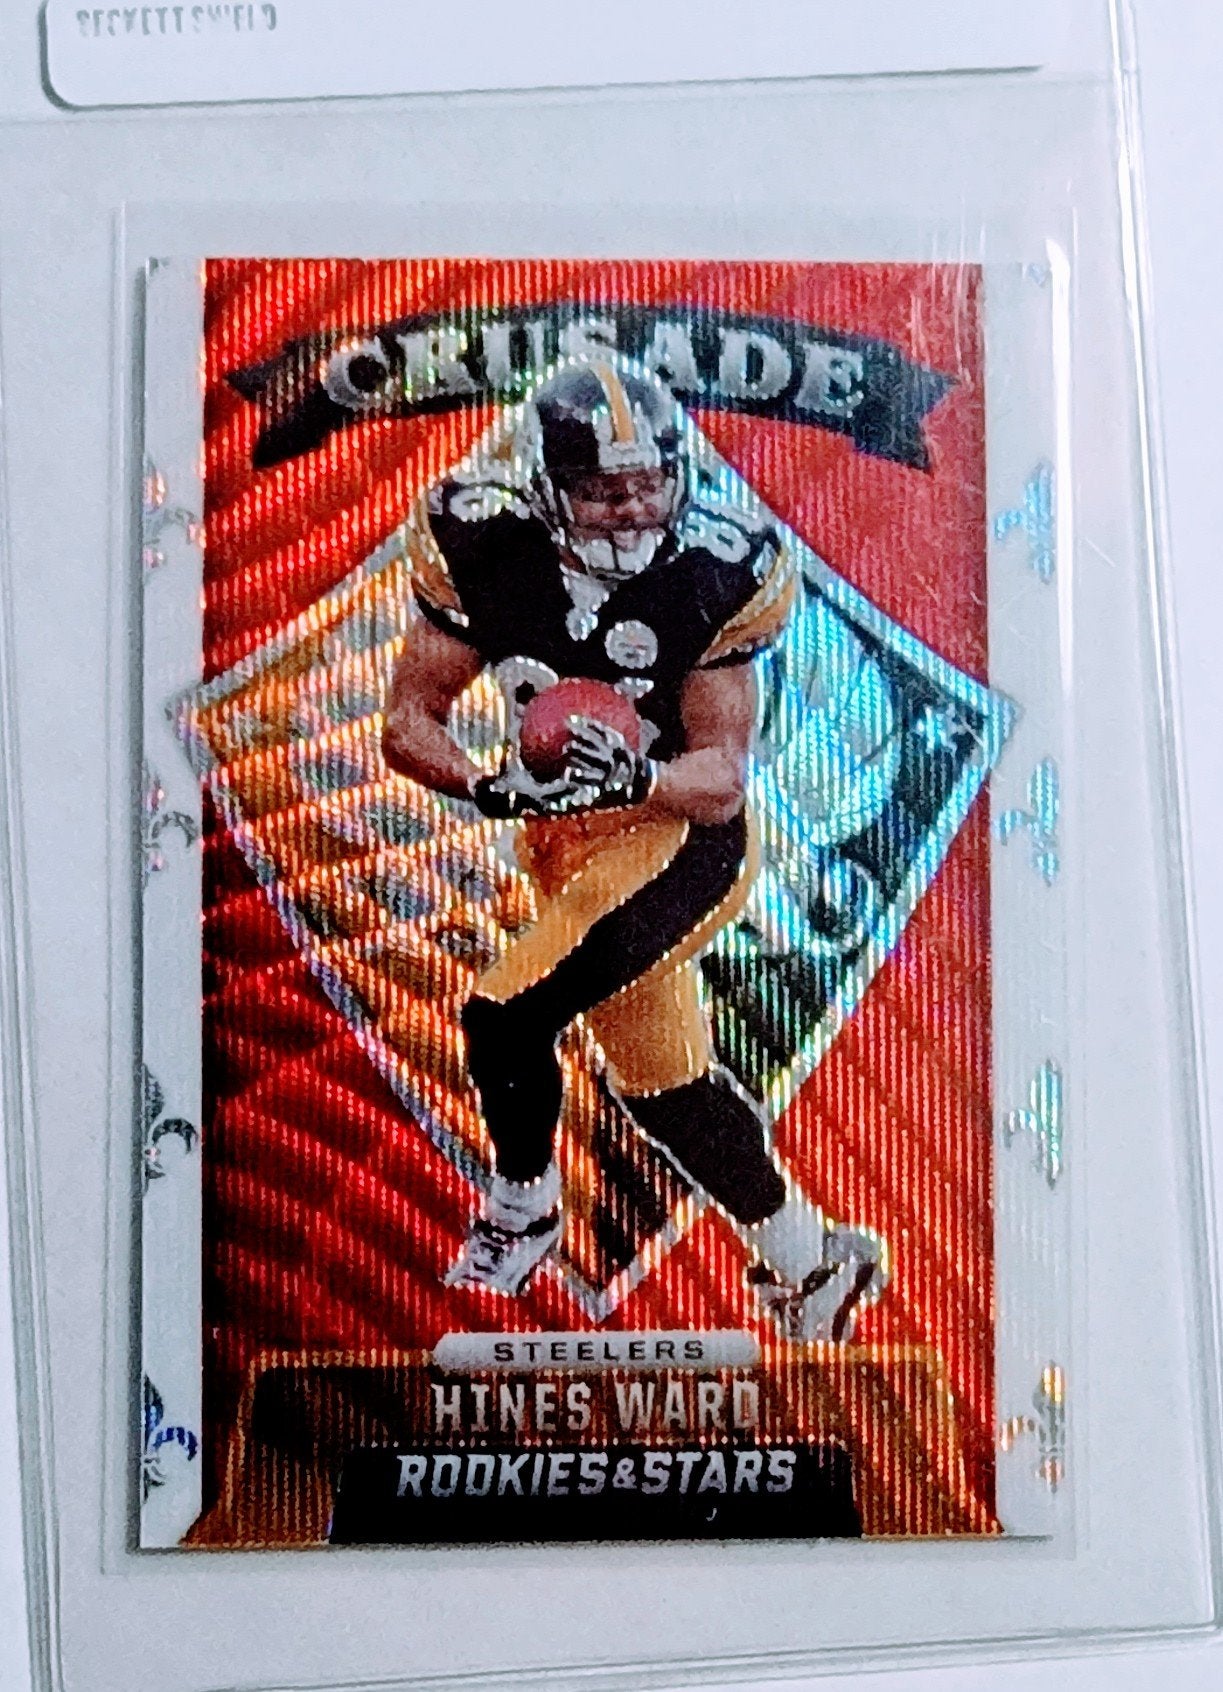 2021 Panini Rookies and Stars Hines Ward Crusade Insert Refractor l Football Card AVM1 simple Xclusive Collectibles   